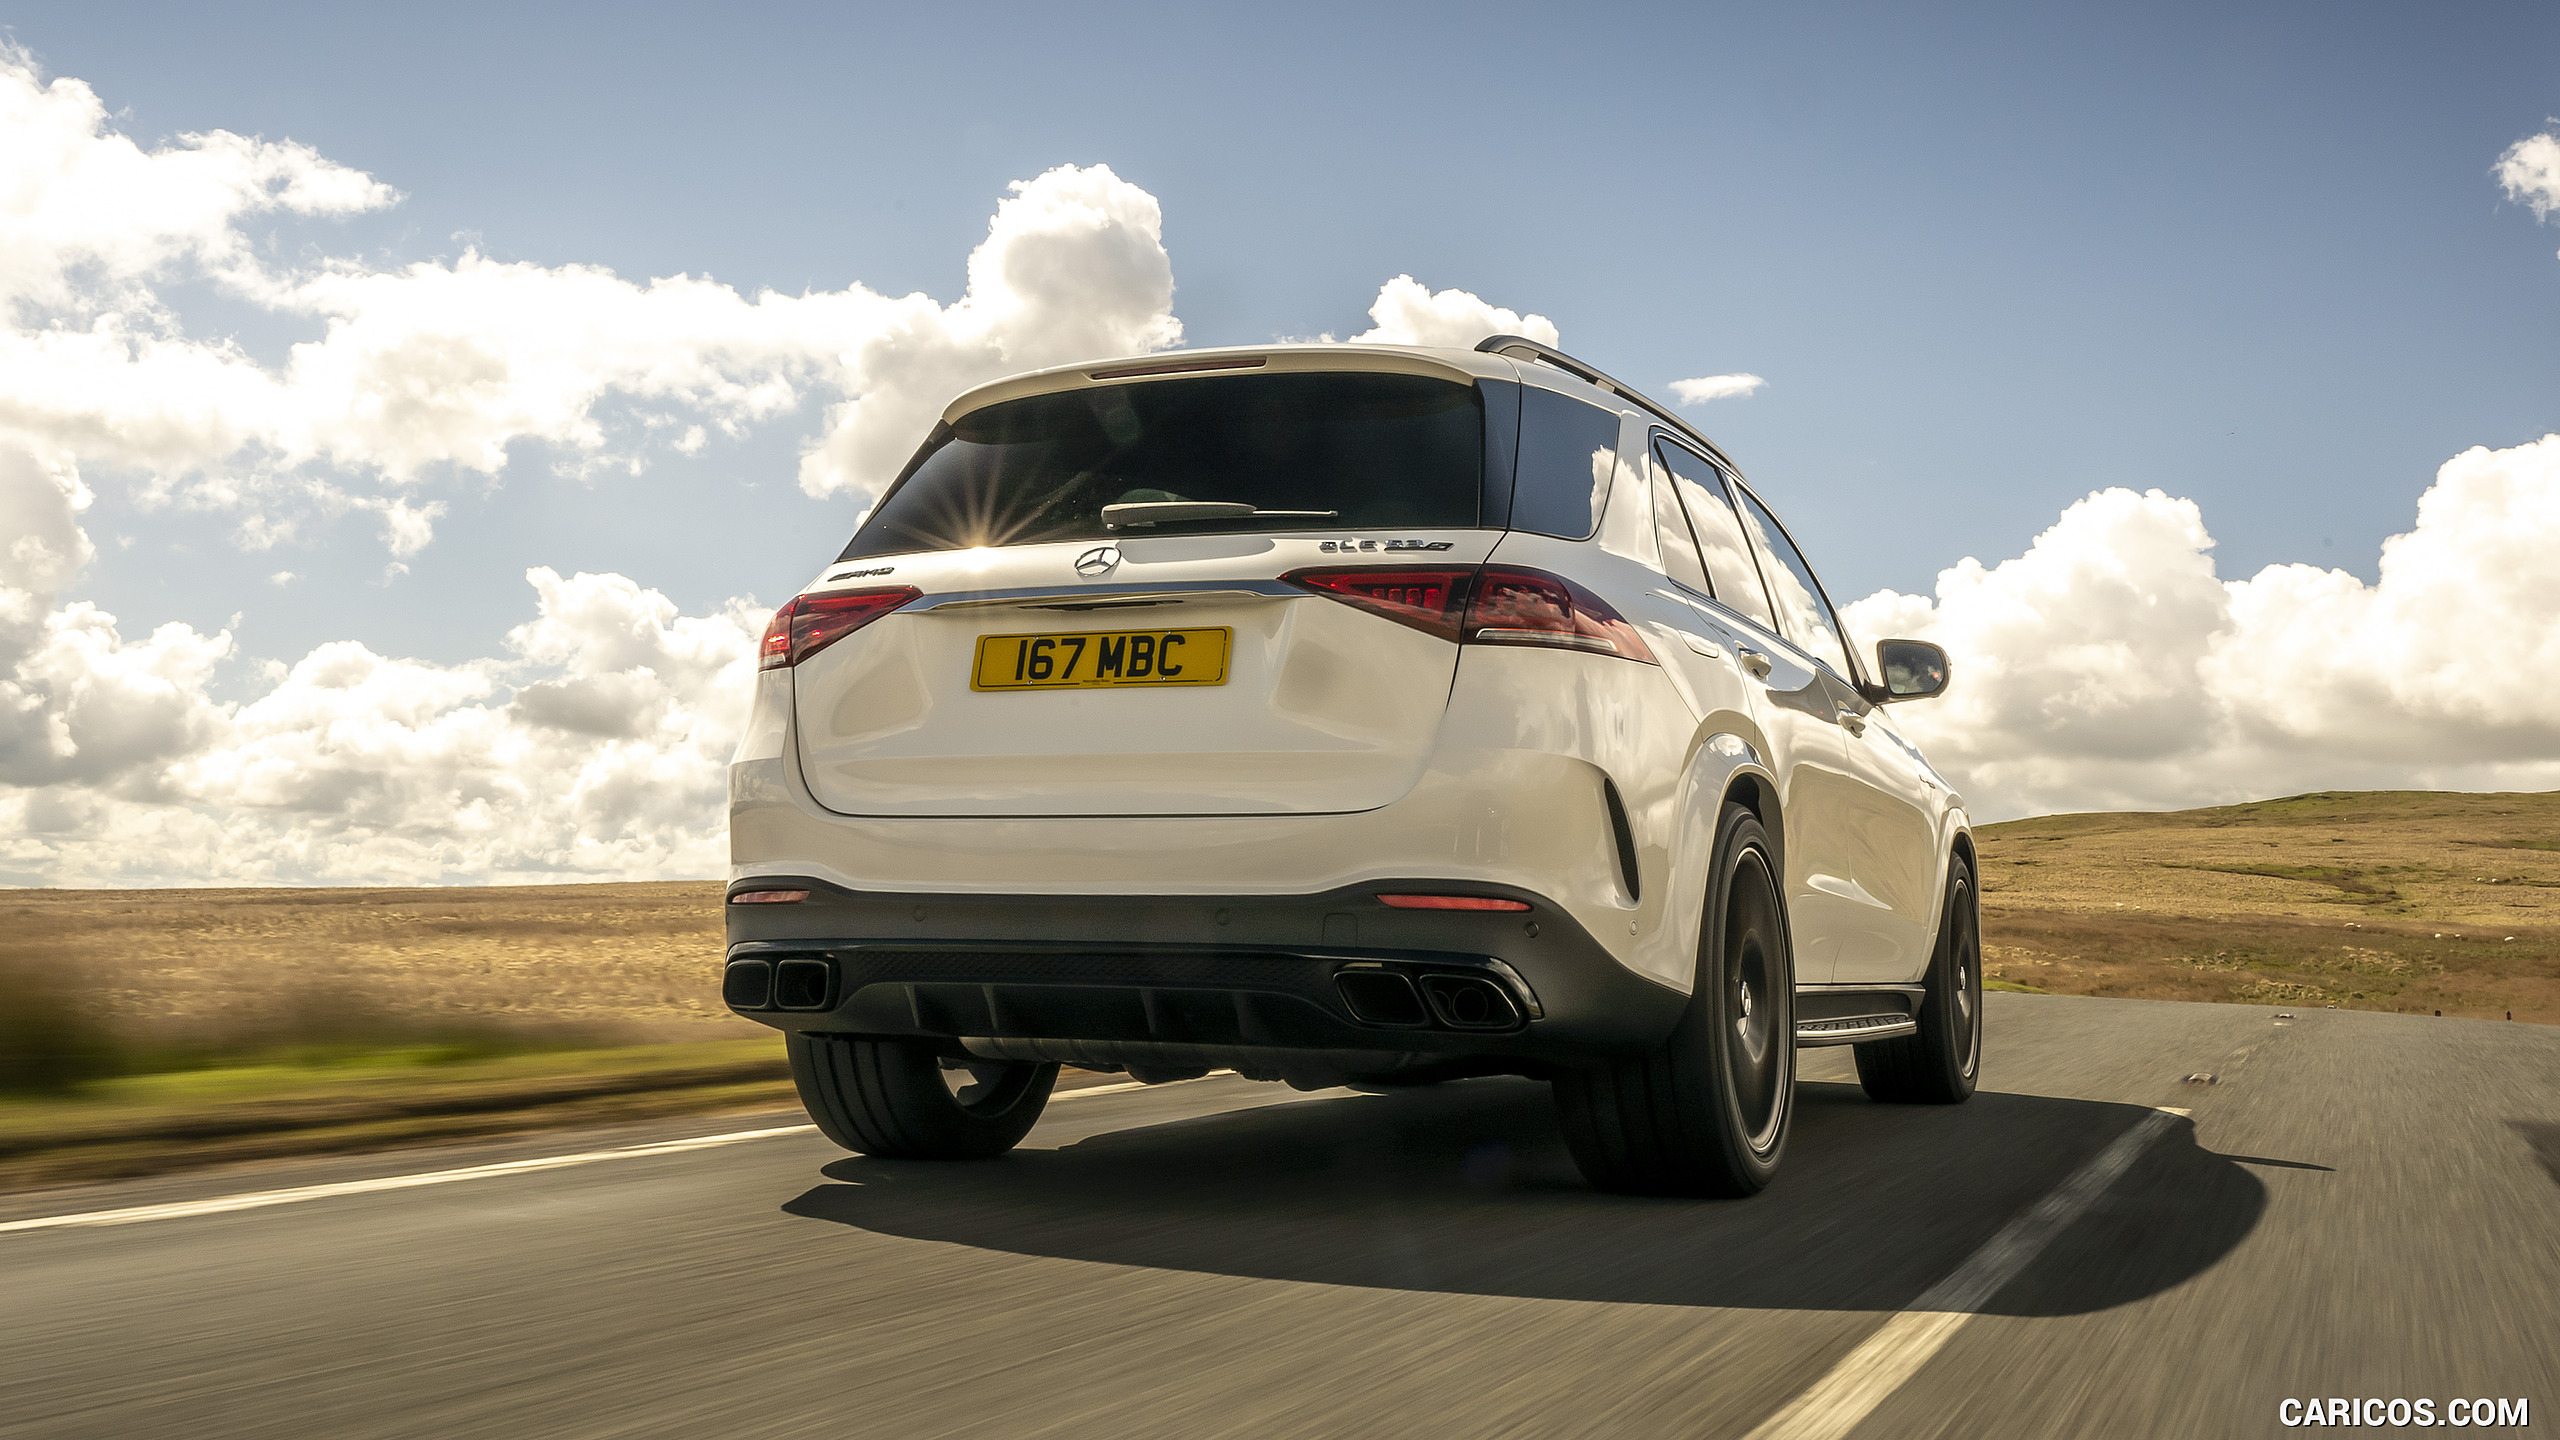 2021 Mercedes-AMG GLE 63 S 4MATIC (UK-Spec) - Rear, #124 of 187